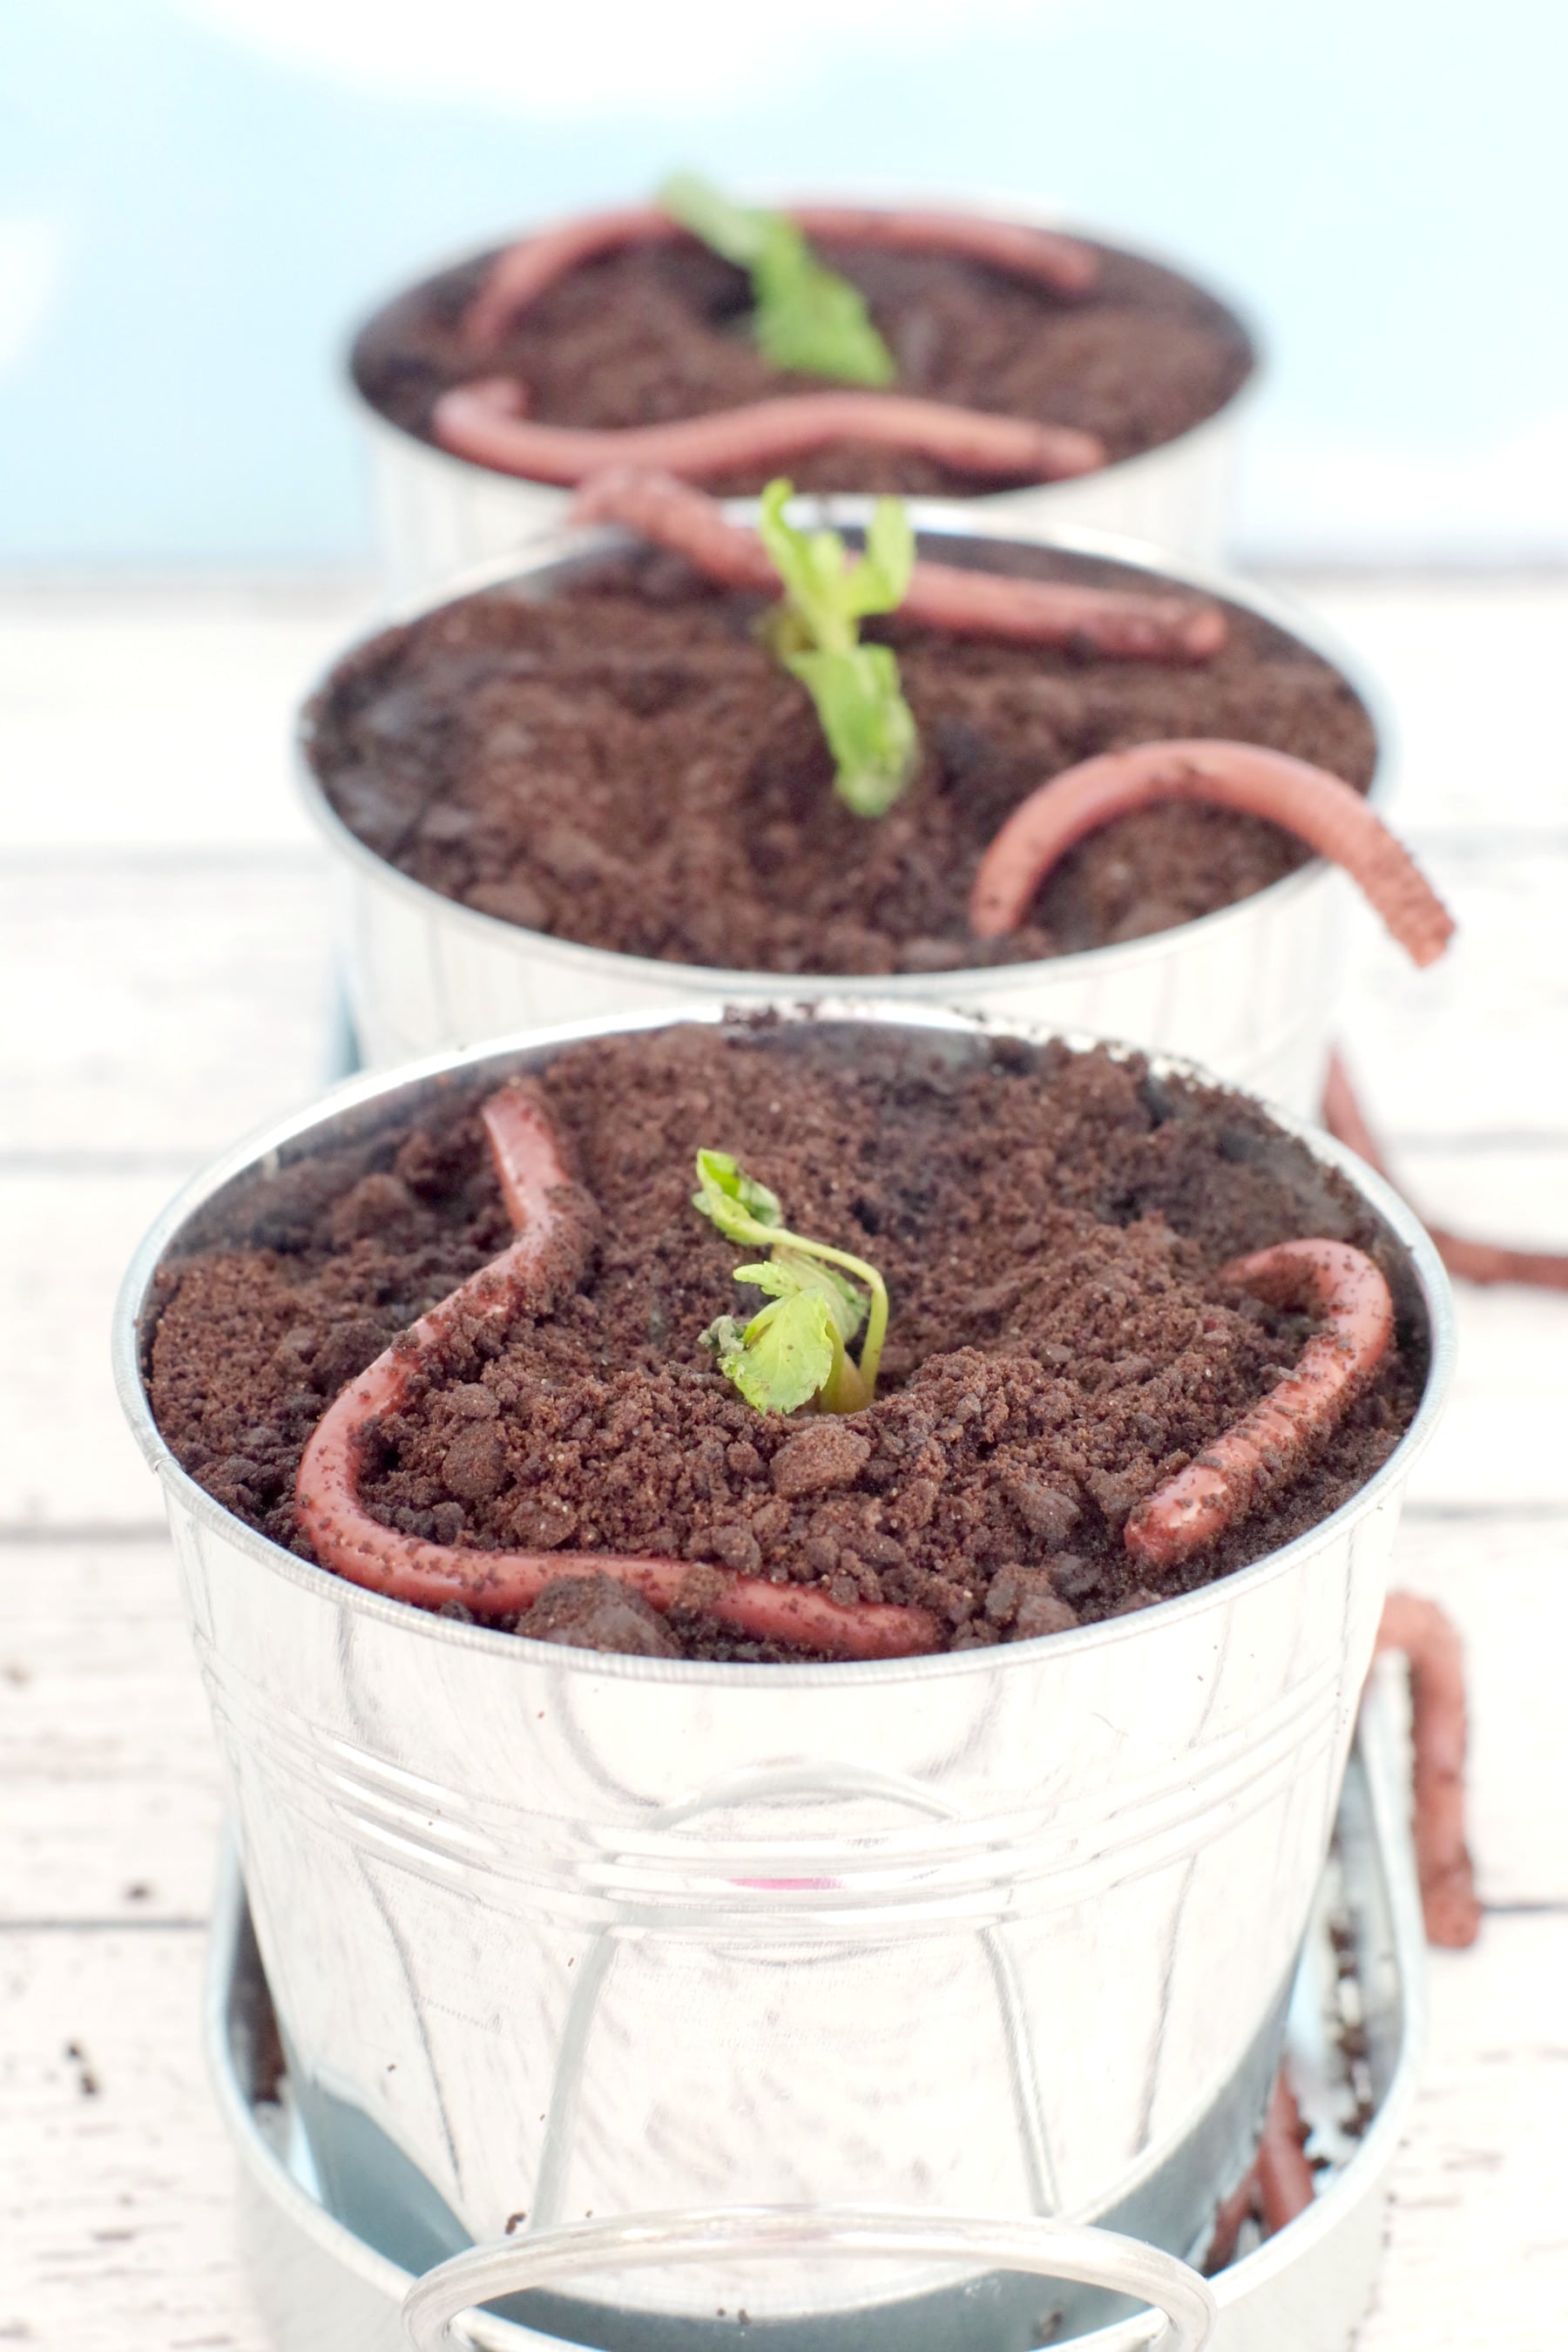 Jello worms in dirt in planter with mint sprig